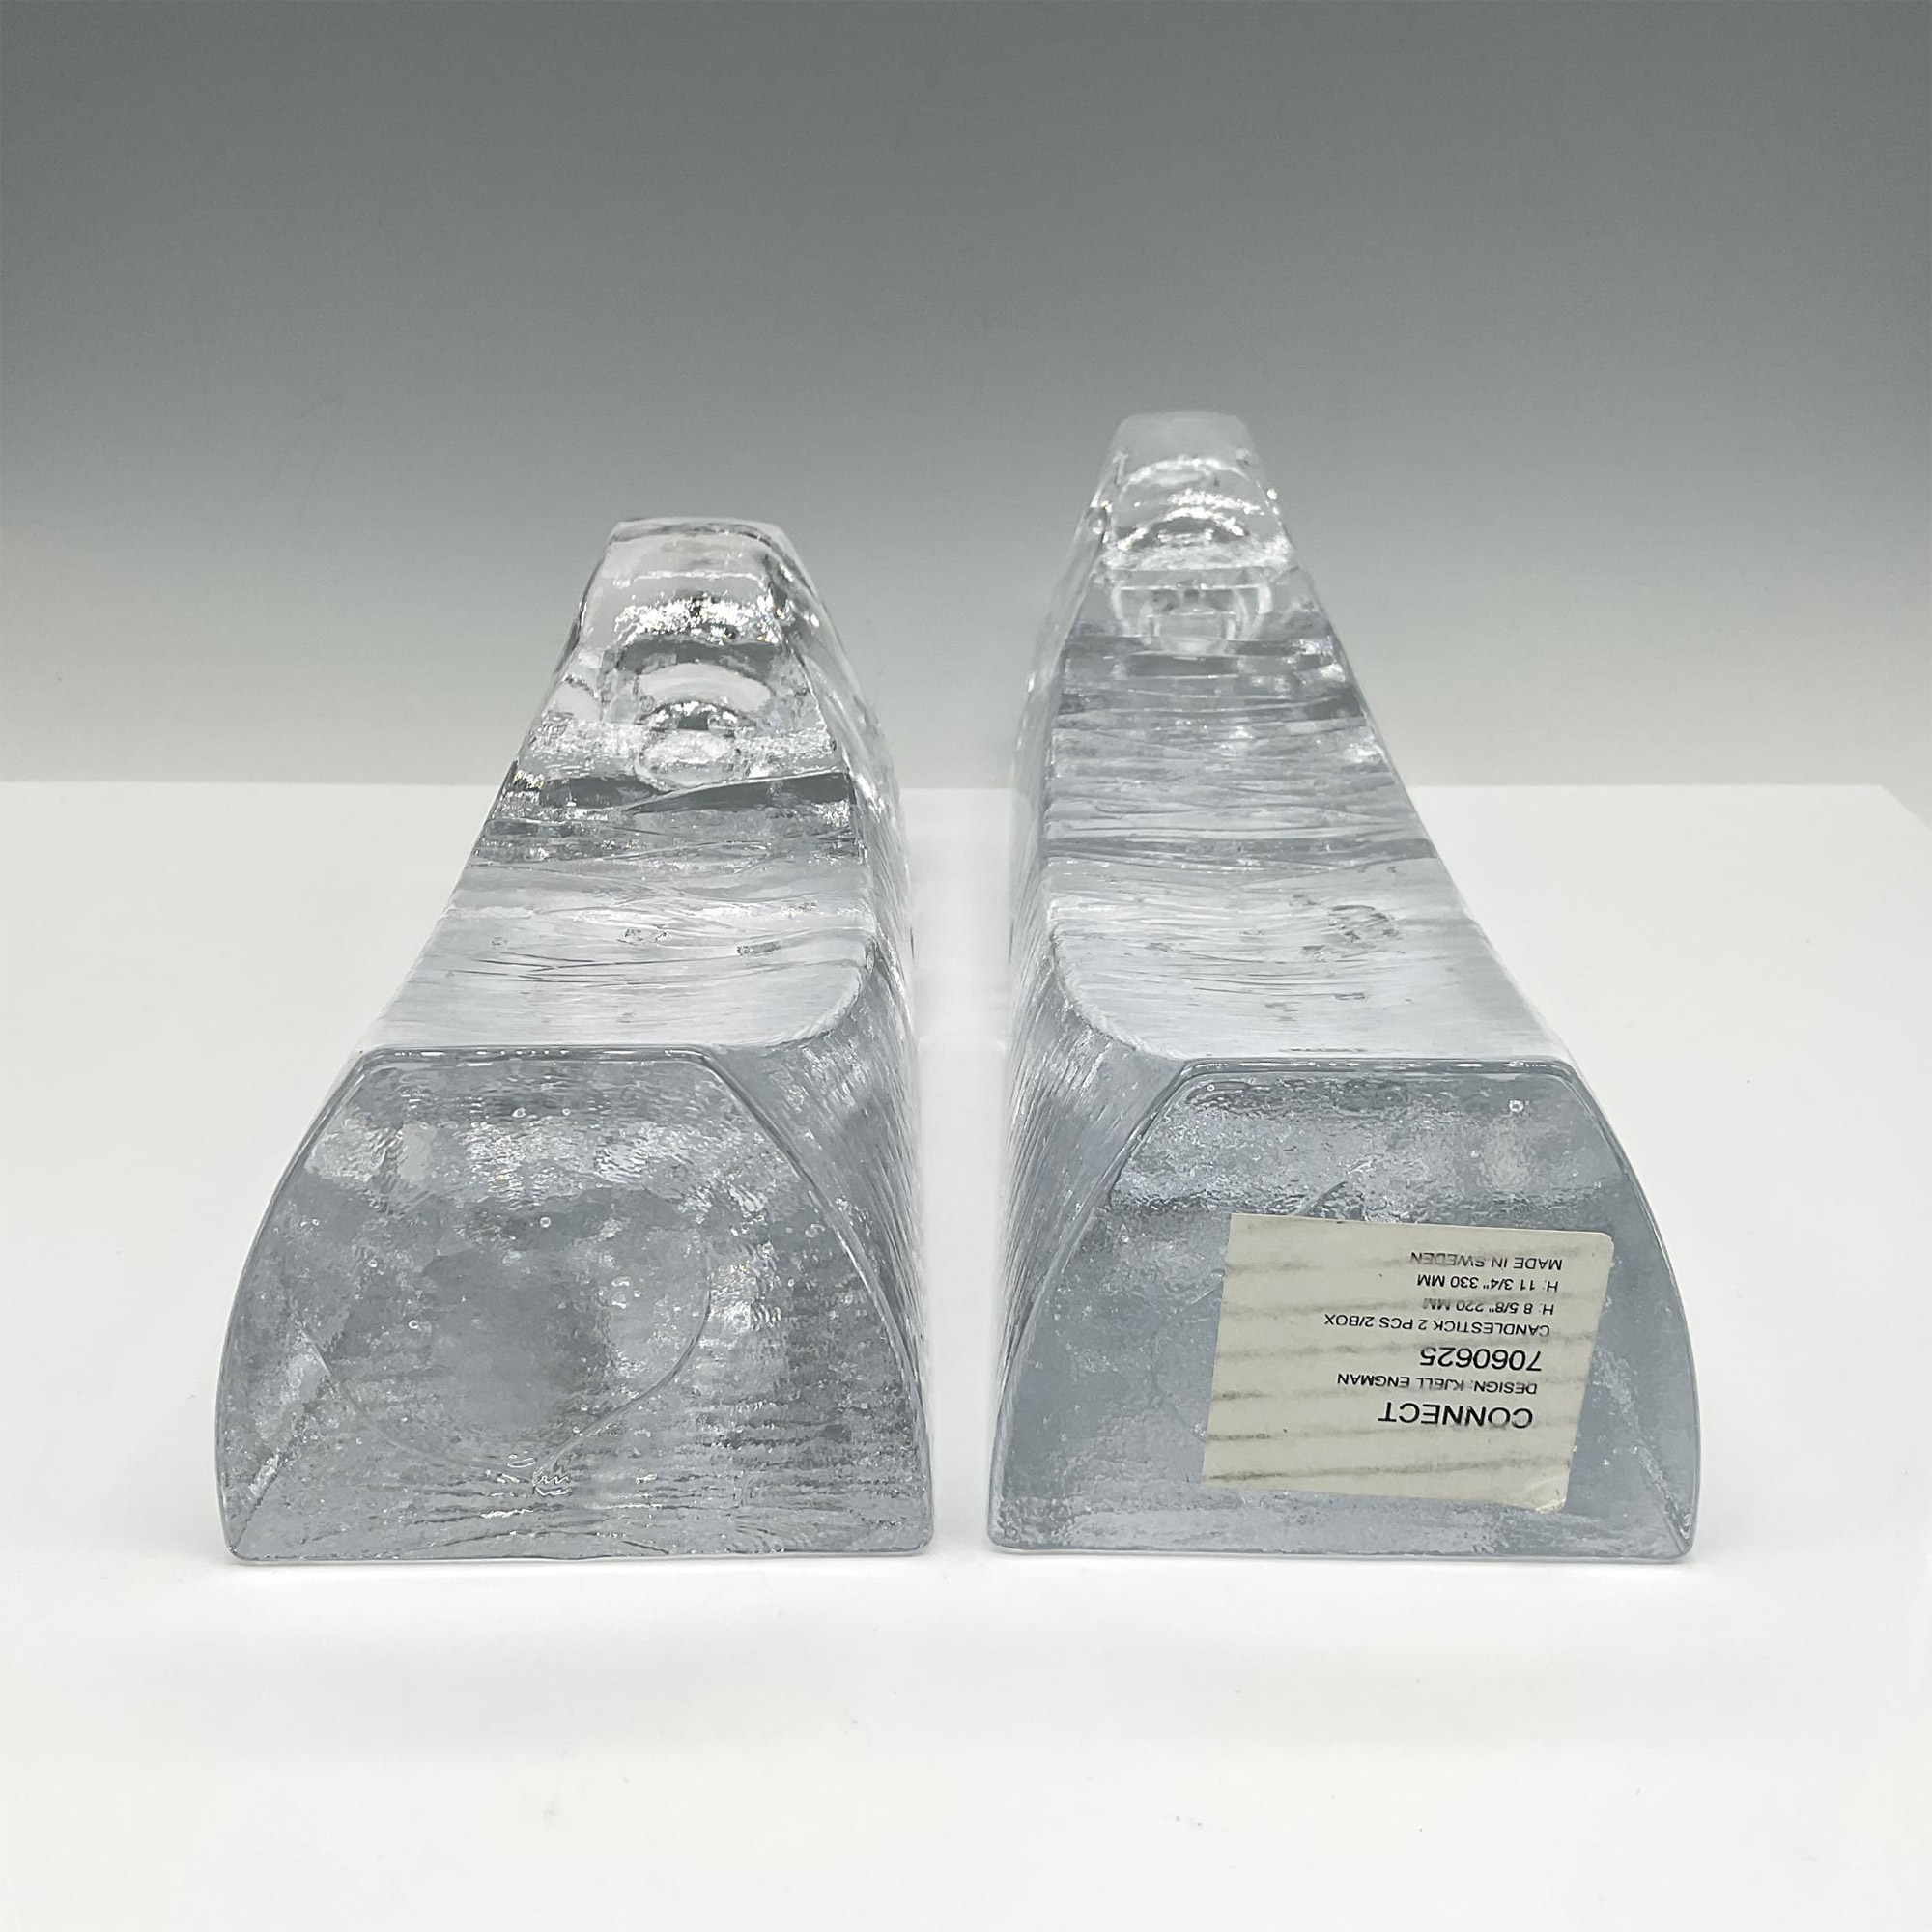 2pc Kosta Boda Crystal Candle Holders, Connect - Image 5 of 5